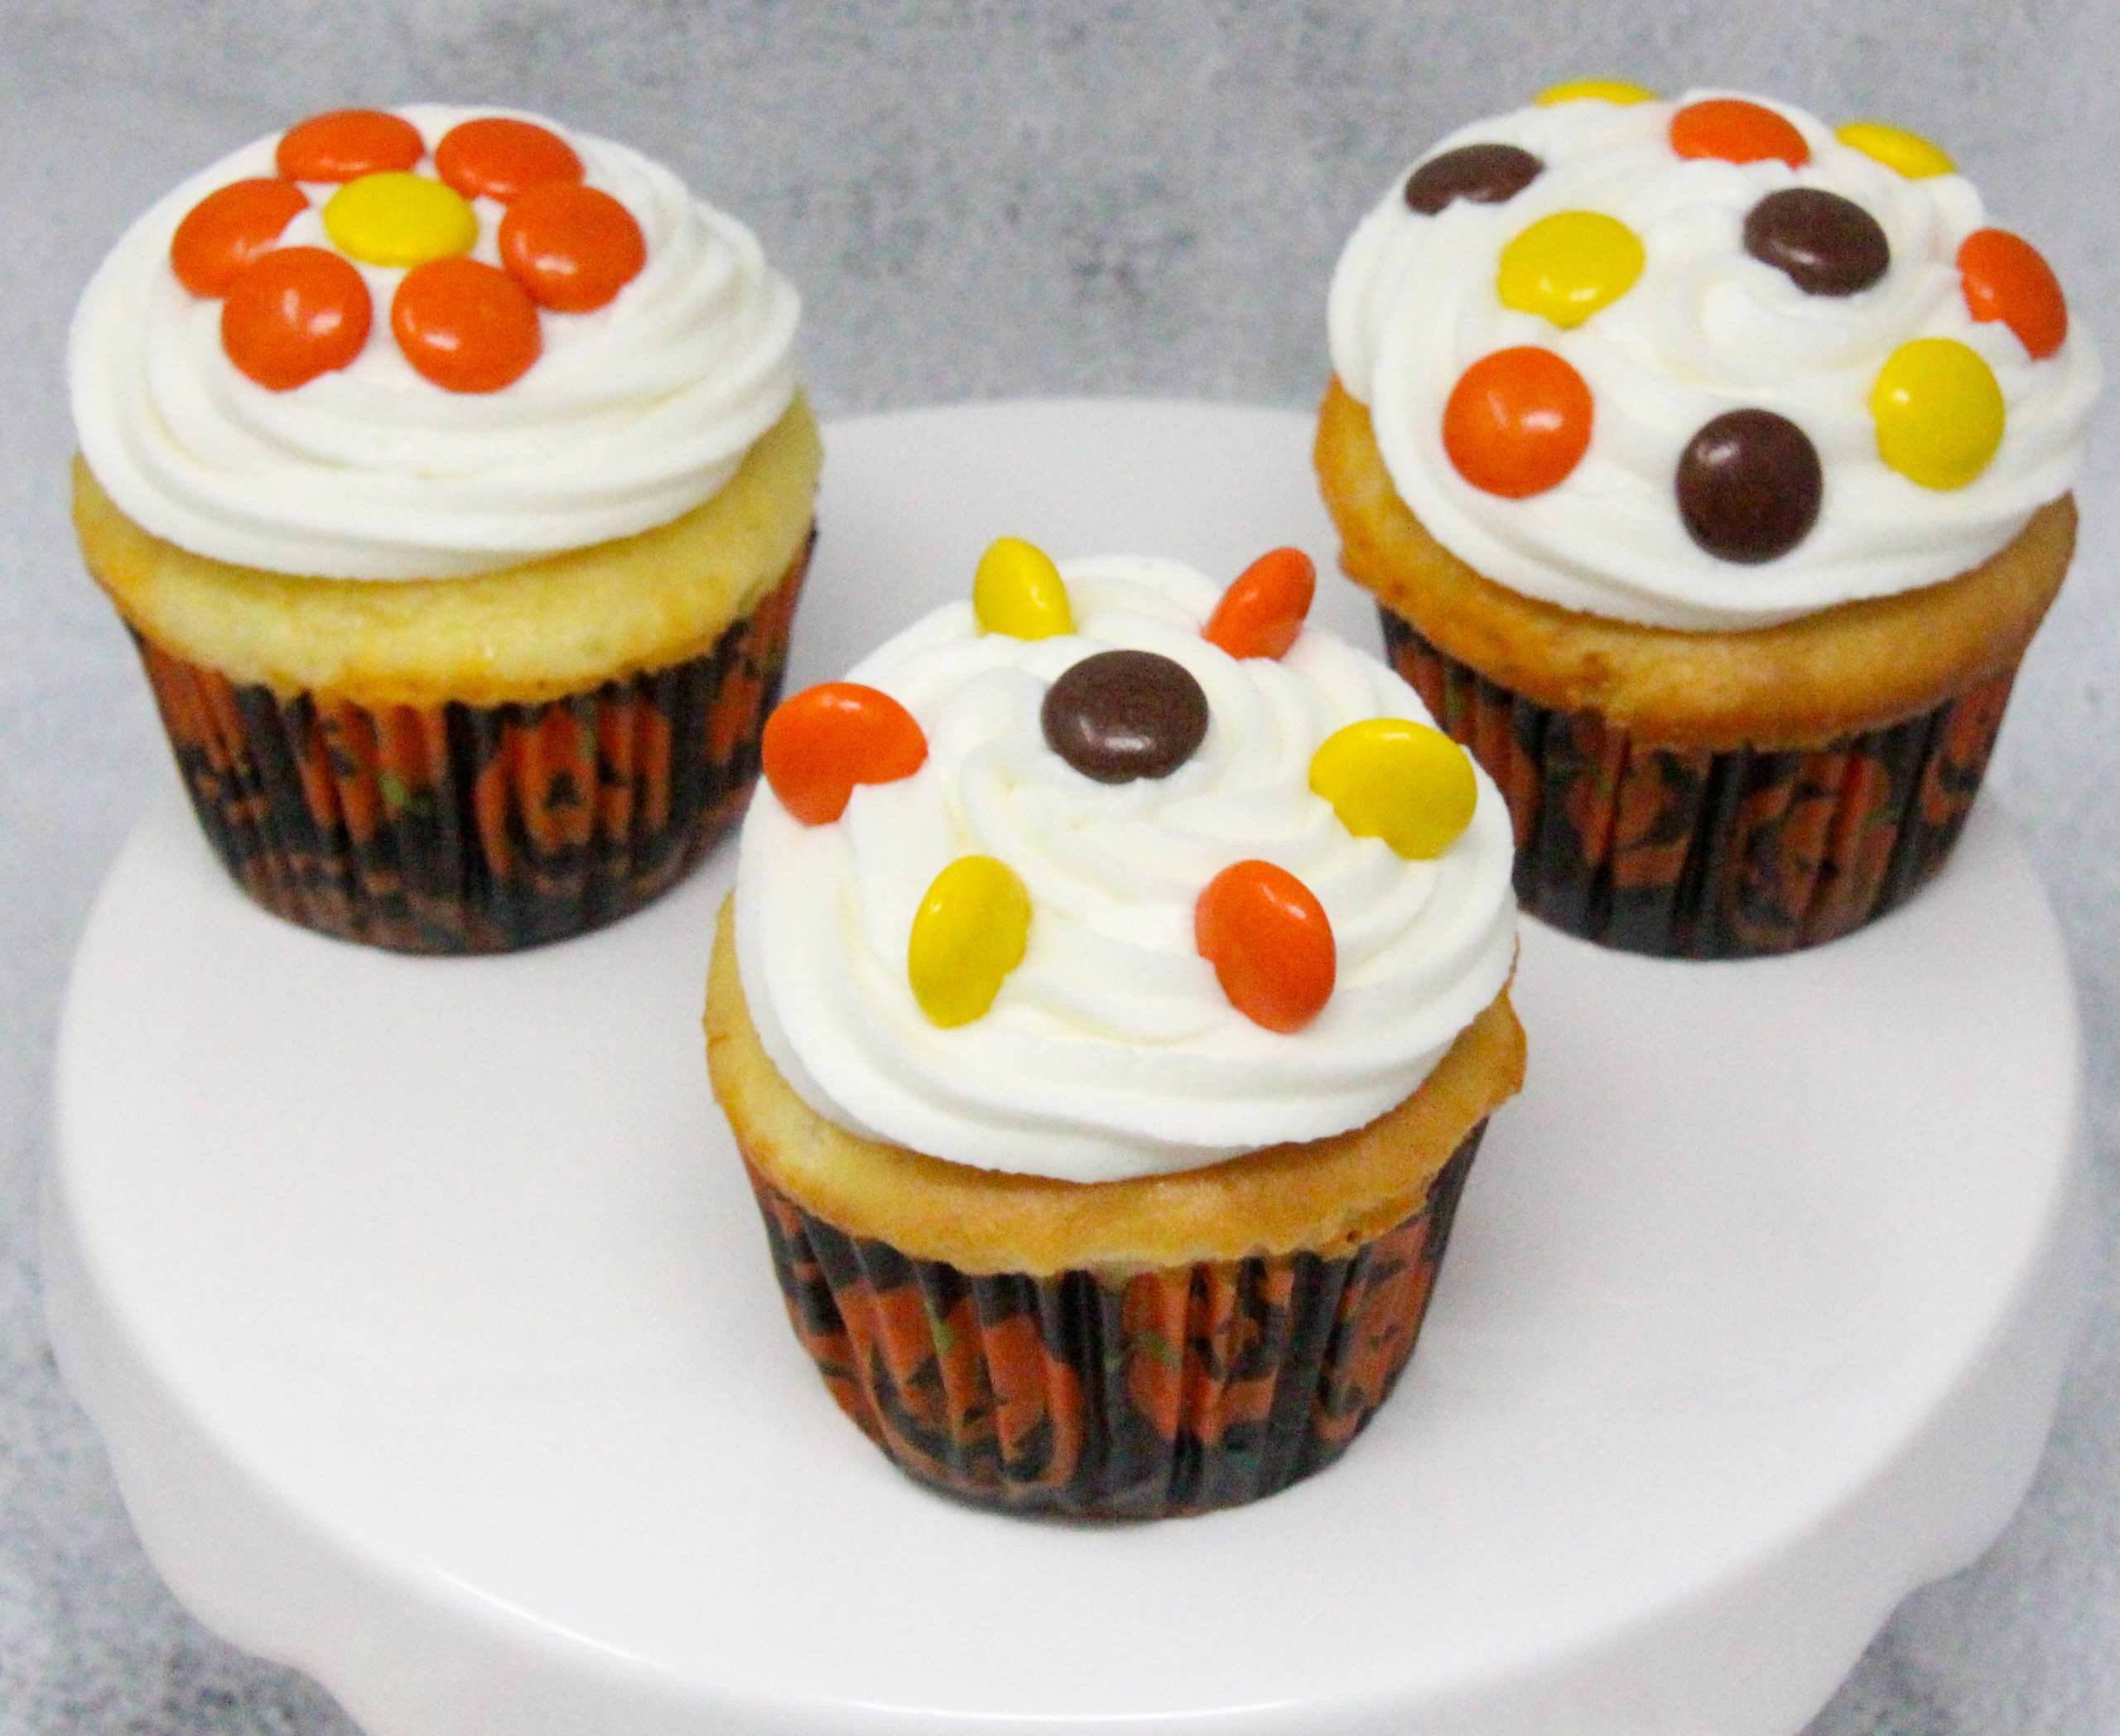 Triple-Layer Halloween Cupcakes is quick and easy, with a delicious combination of chocolate and orange flavors. With simple Reese’s Pieces used to decorate in orange and brown Halloween colors, these cupcakes will be sure to please your ghosts and ghouls! Recipe shared with permission granted by Carol J. Perry, author of A TRIPLE-LAYER HALLOWEEN MURDER.